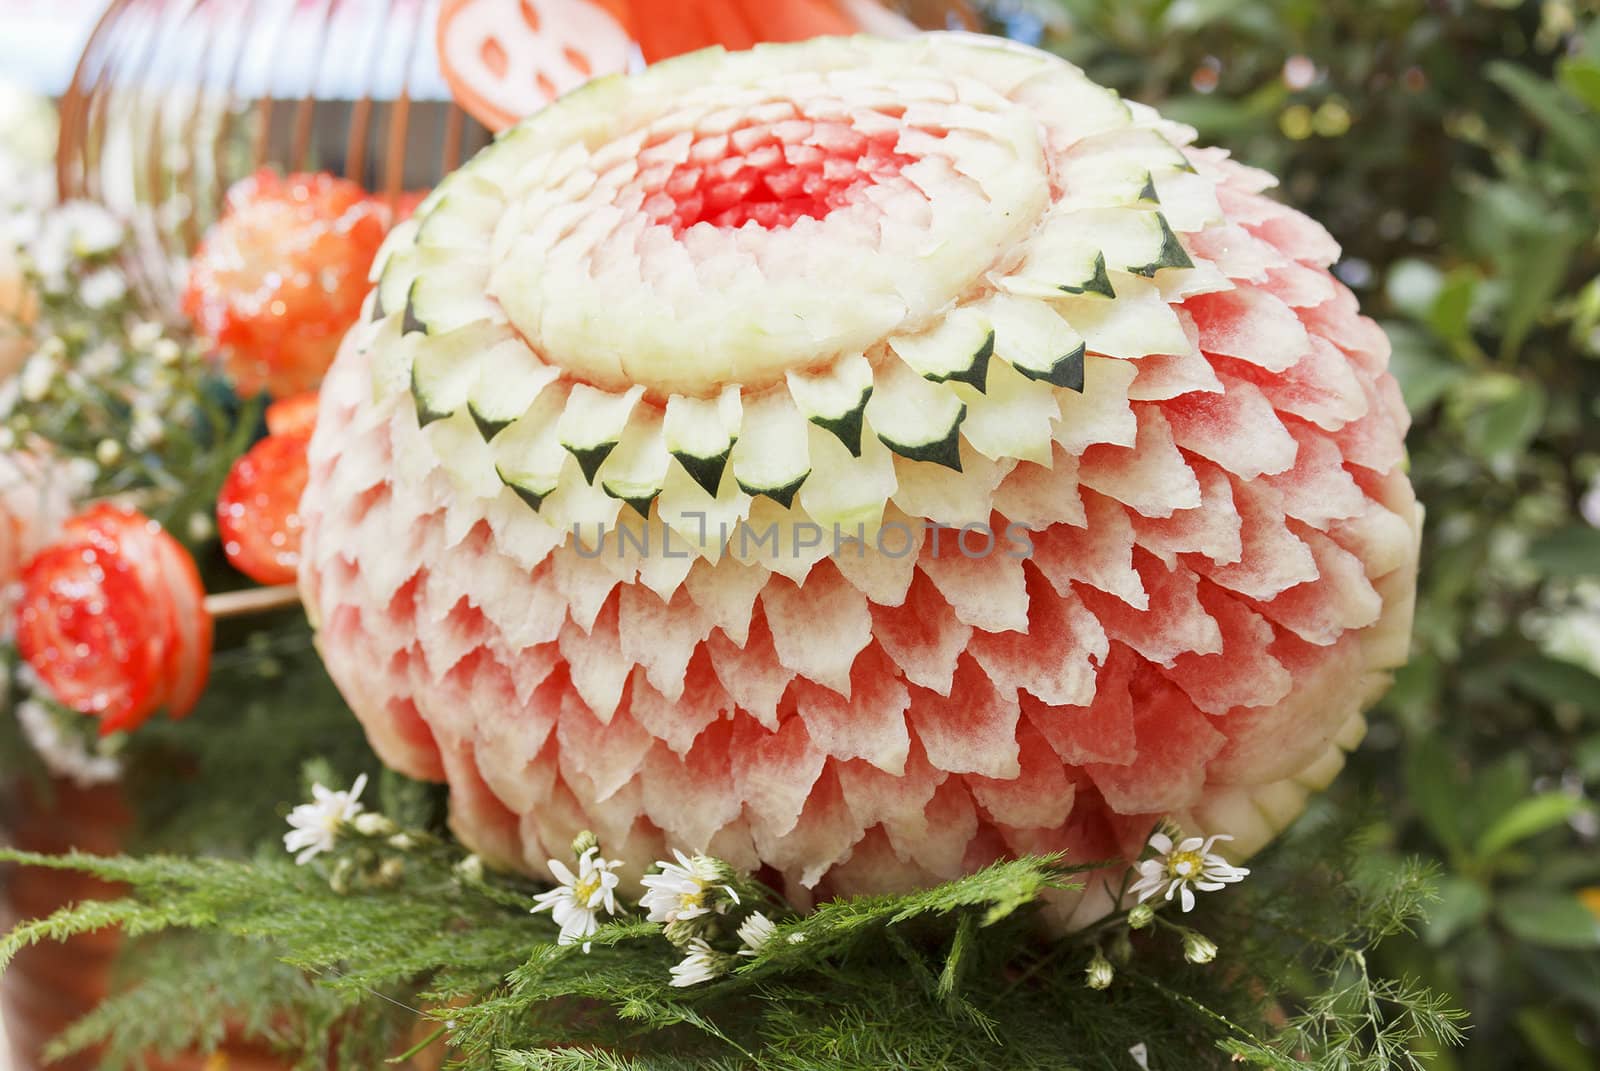 Thai art of watermelon carved into flower shapes